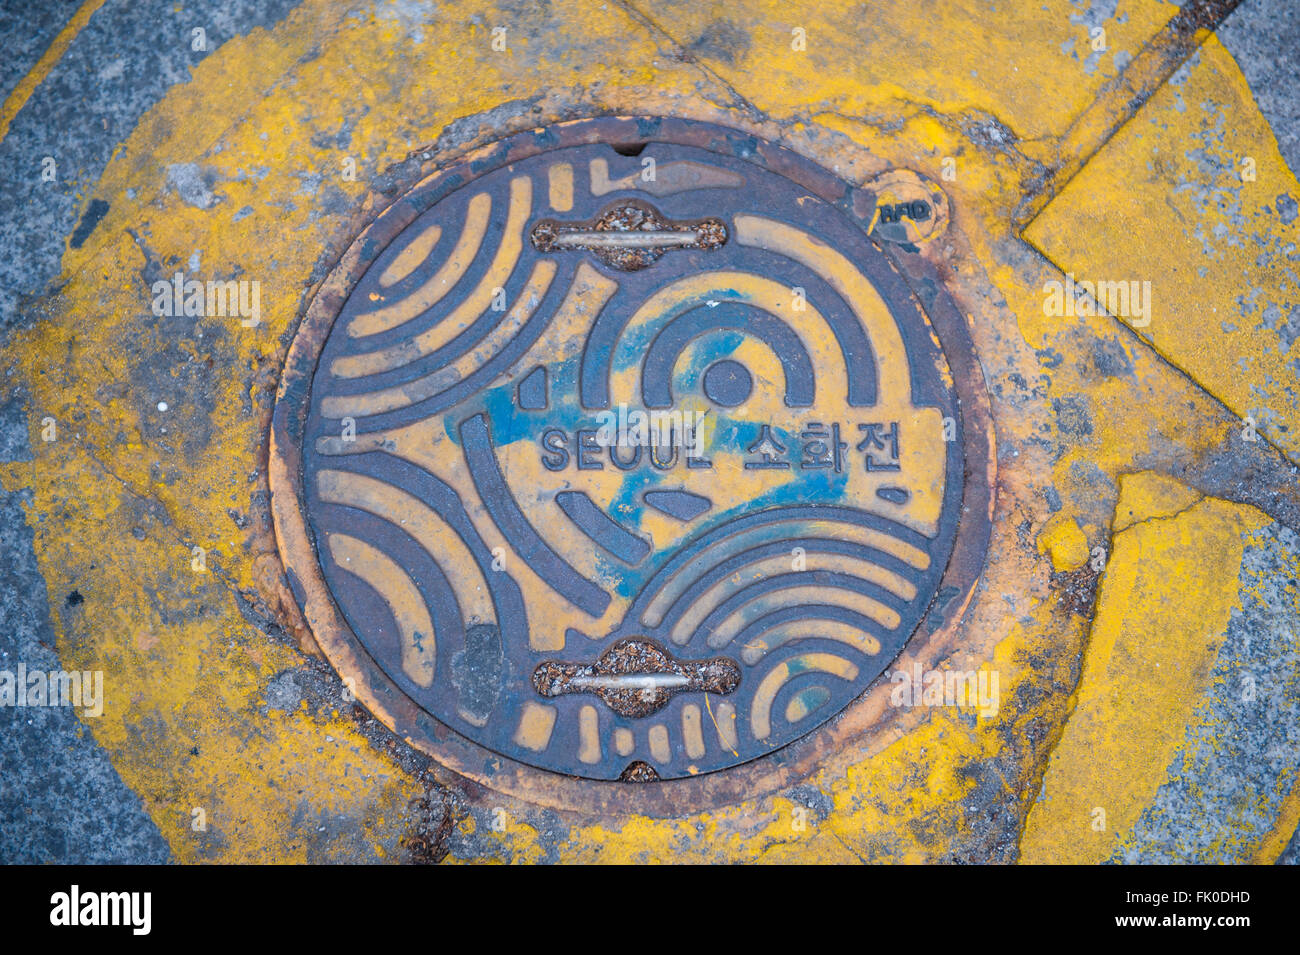 Man hole cover in Seoul Stock Photo